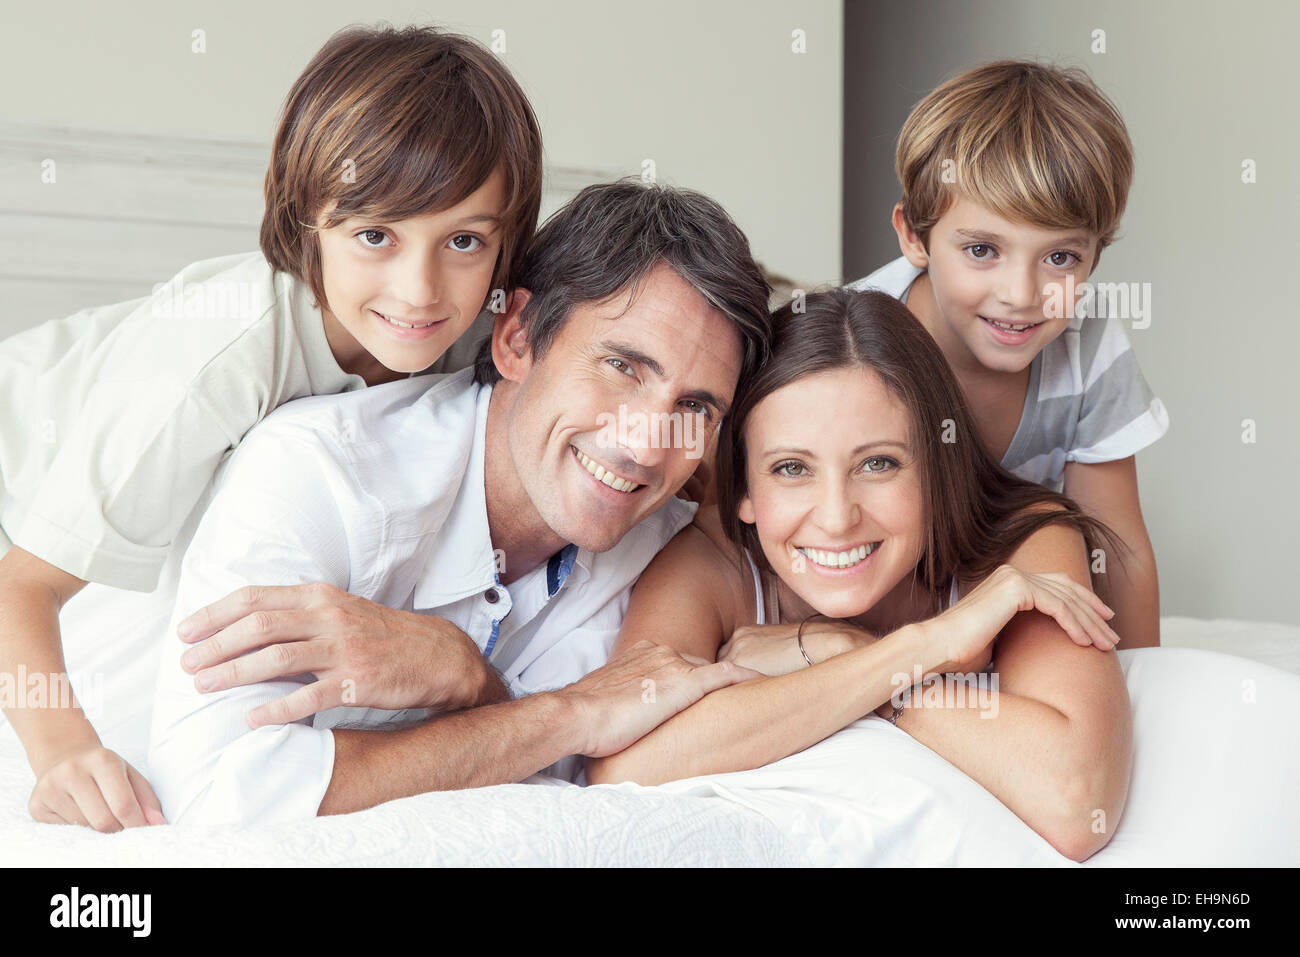 Family lying on bed, portrait Stock Photo